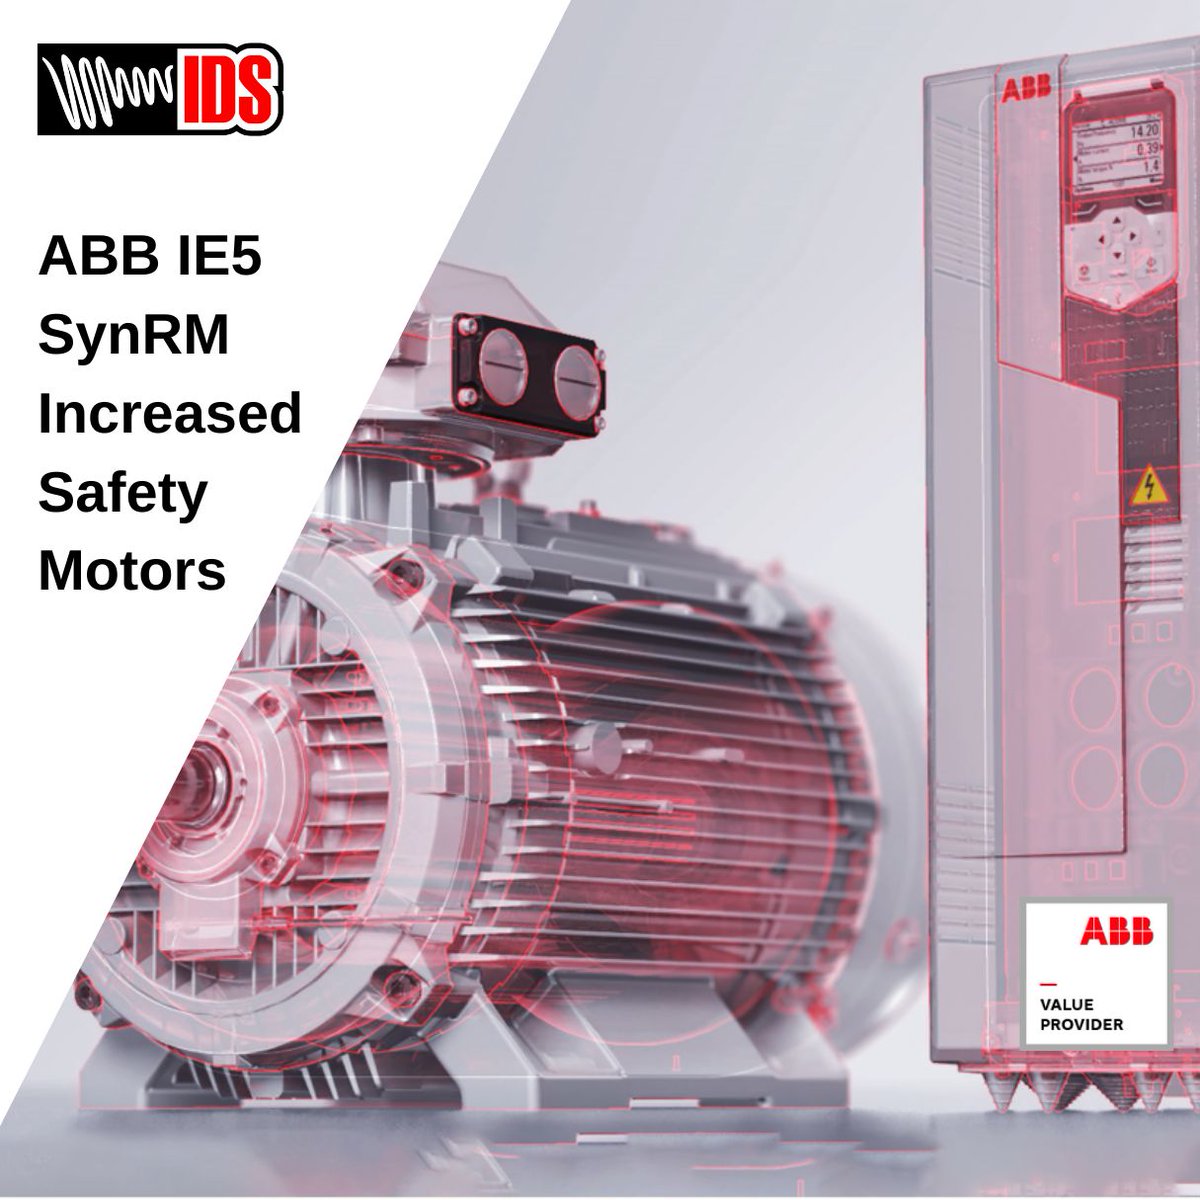 ABB has introduced its IE5 SynRM Increased Safety motors. This innovation marks ABB as the world’s first manufacturer to blend IE5 efficiency with heightened safety features, designed specifically for hazardous areas. Read more: inverterdrivesystems.com/abb-ie5-synrm-… #ABB #IE5 #HazardousAreas